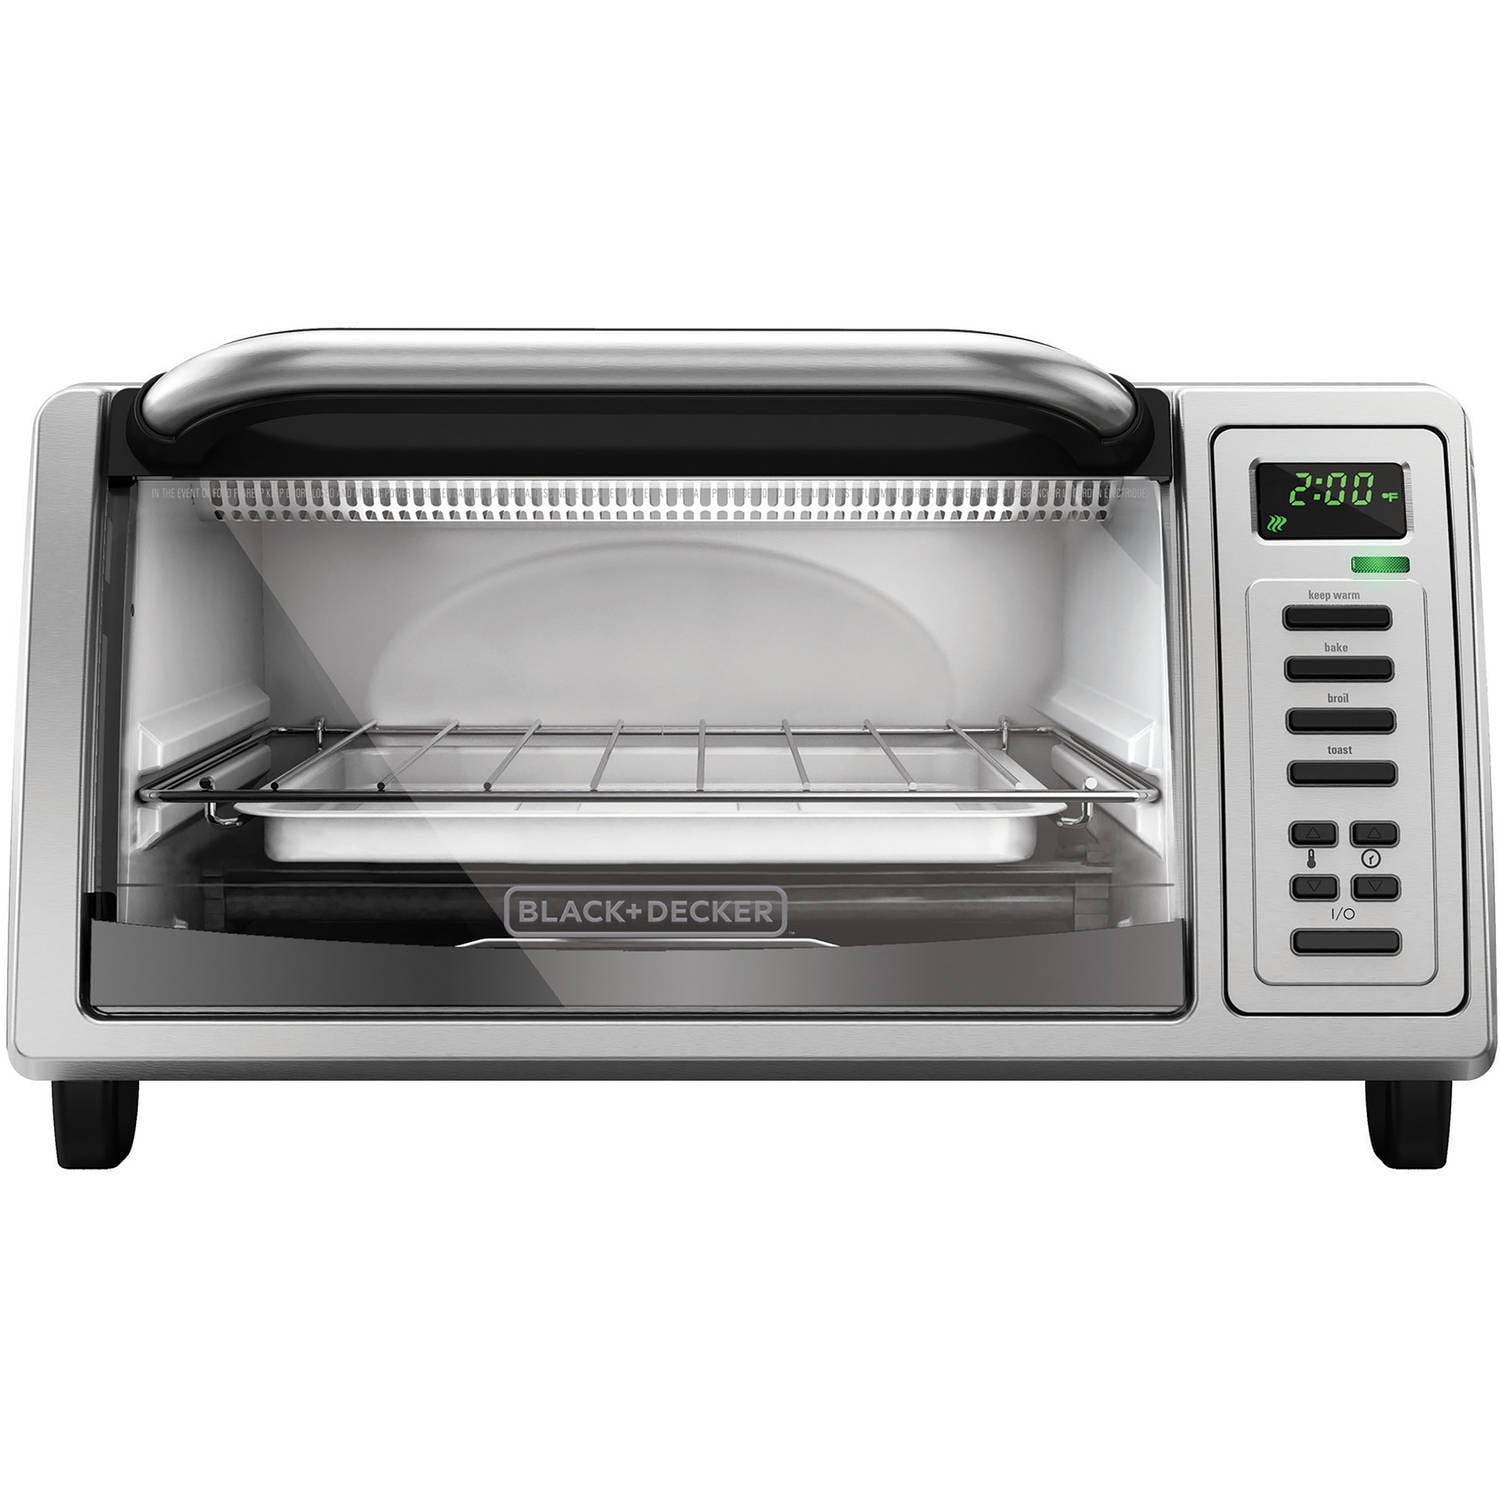 BLACK+DECKER 4-Slice Convection Oven, Stainless Steel, Curved Interior Fits  A 9 Inch Pizza, Electric Oven, Kitchen Appliance - AliExpress